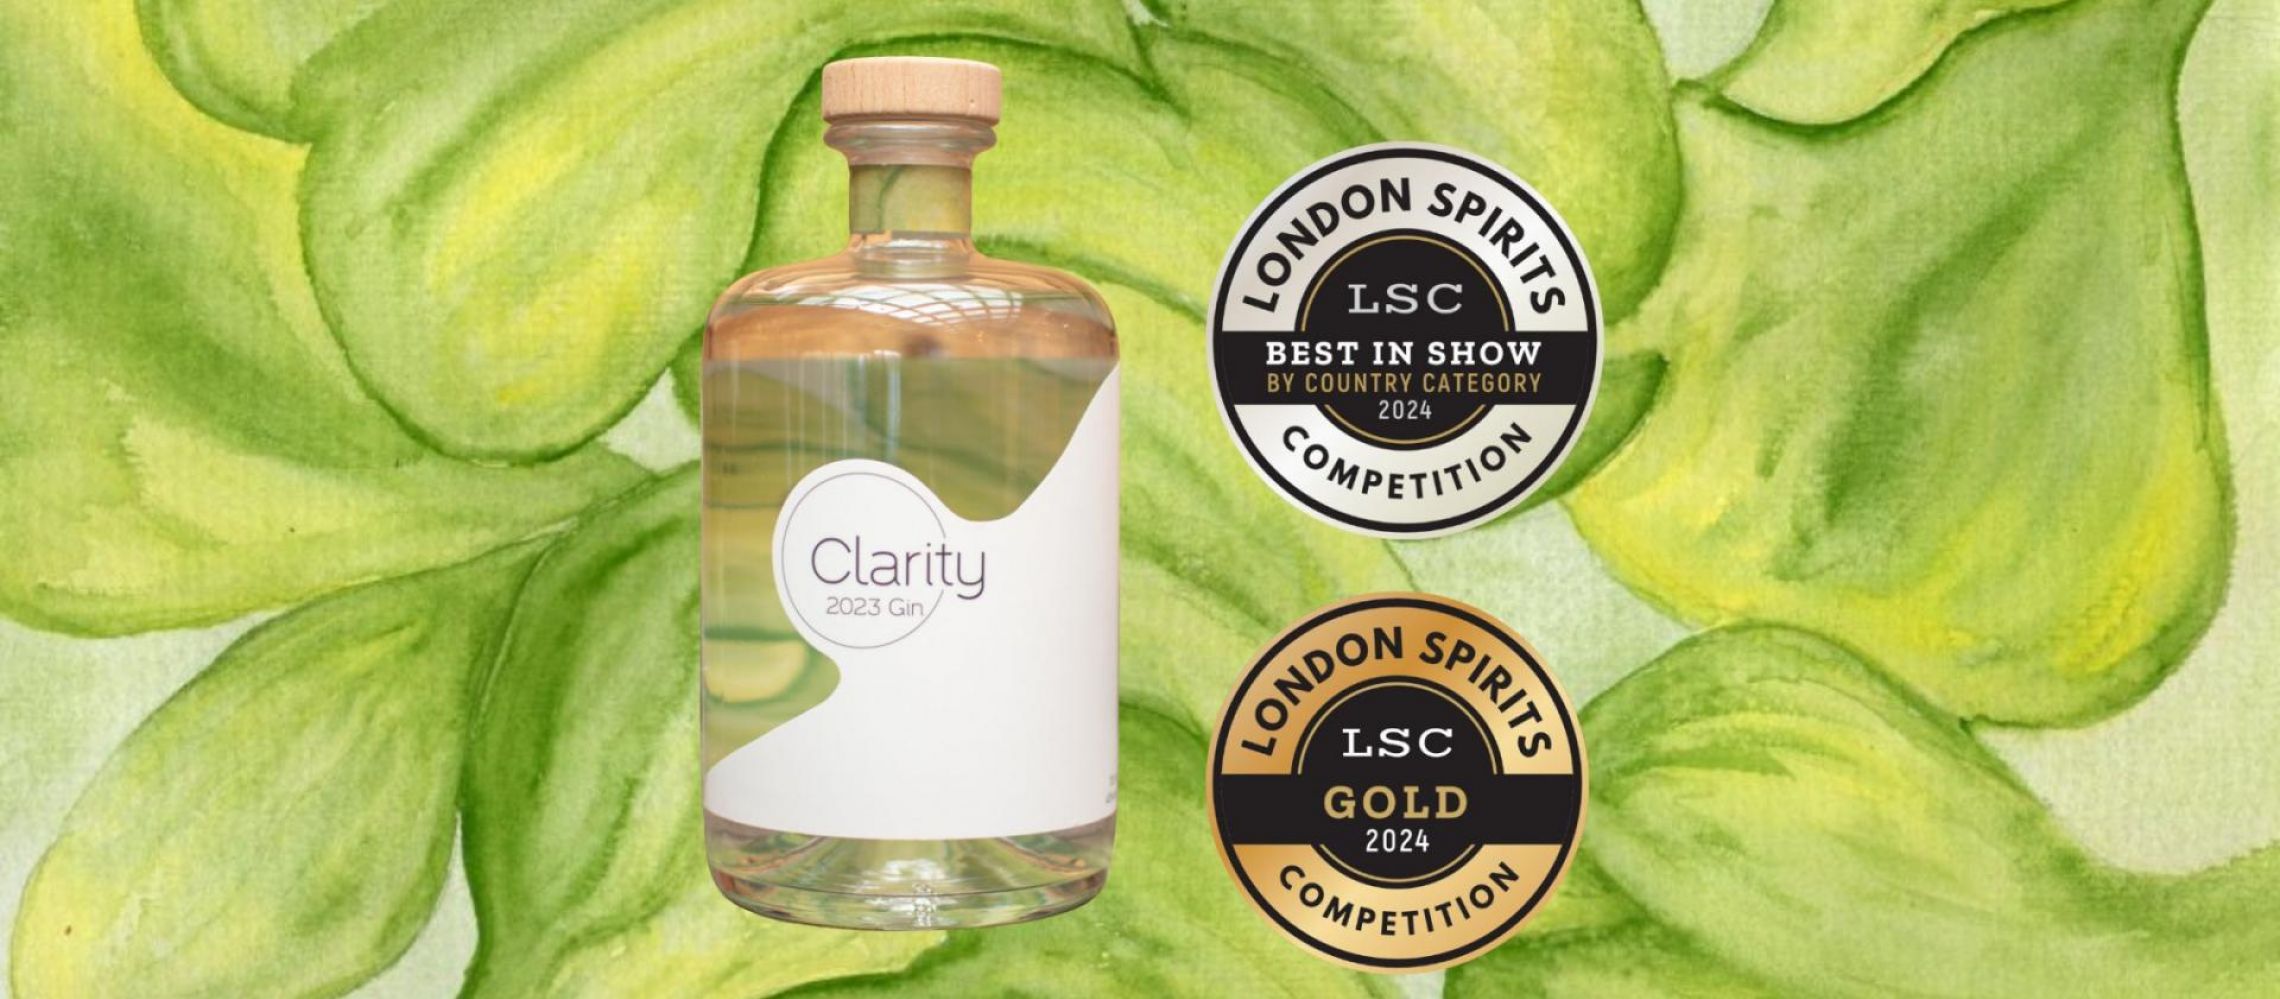 Photo for: Clarity Gin Wins Gold and Best in Show at 2024 London Spirits Competition